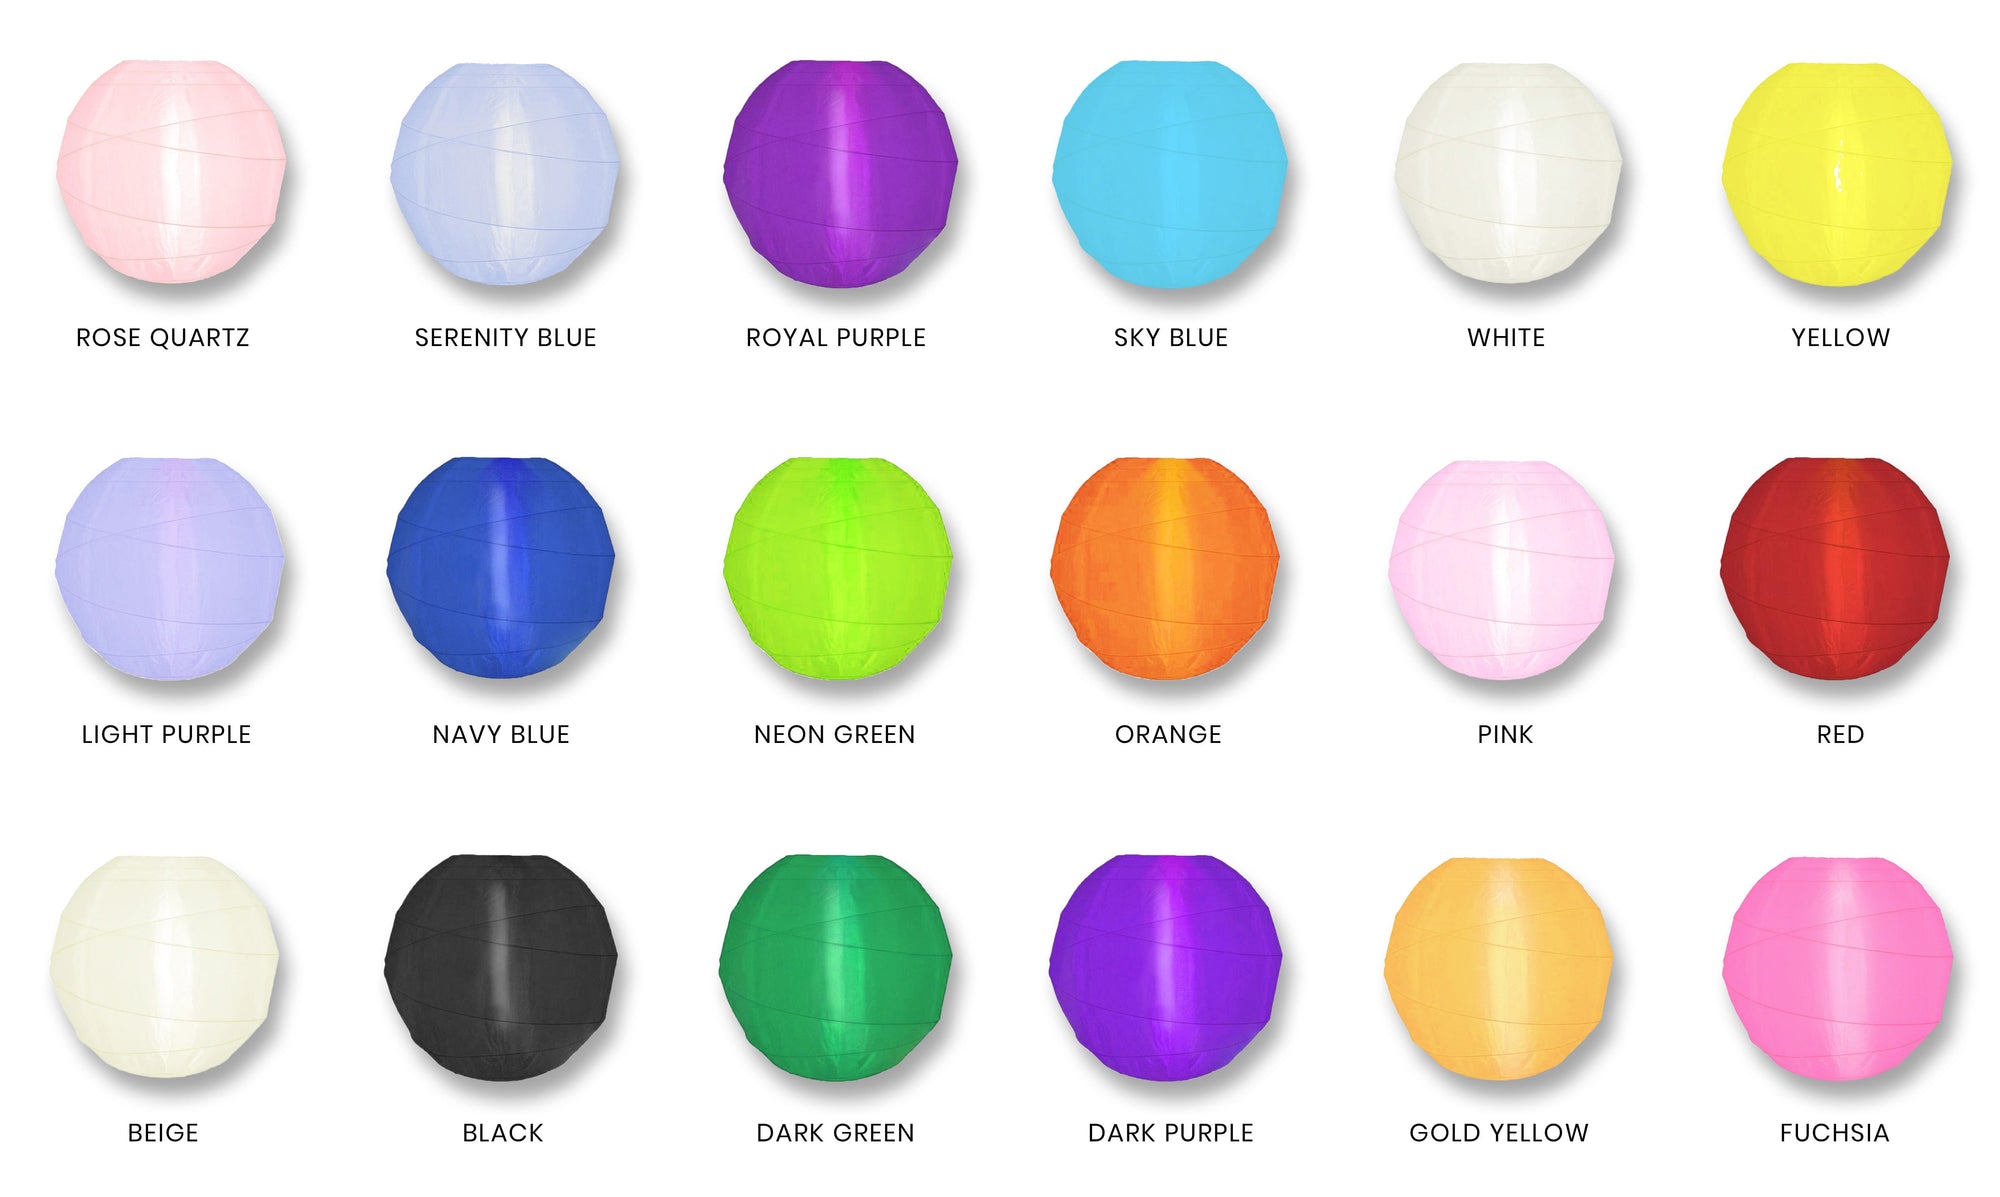 30" to 36" Shimmering Crisscross Ribbing Nylon Lanterns (30-Pack) - Custom Colors and Sizes Available (90-Day Processing)